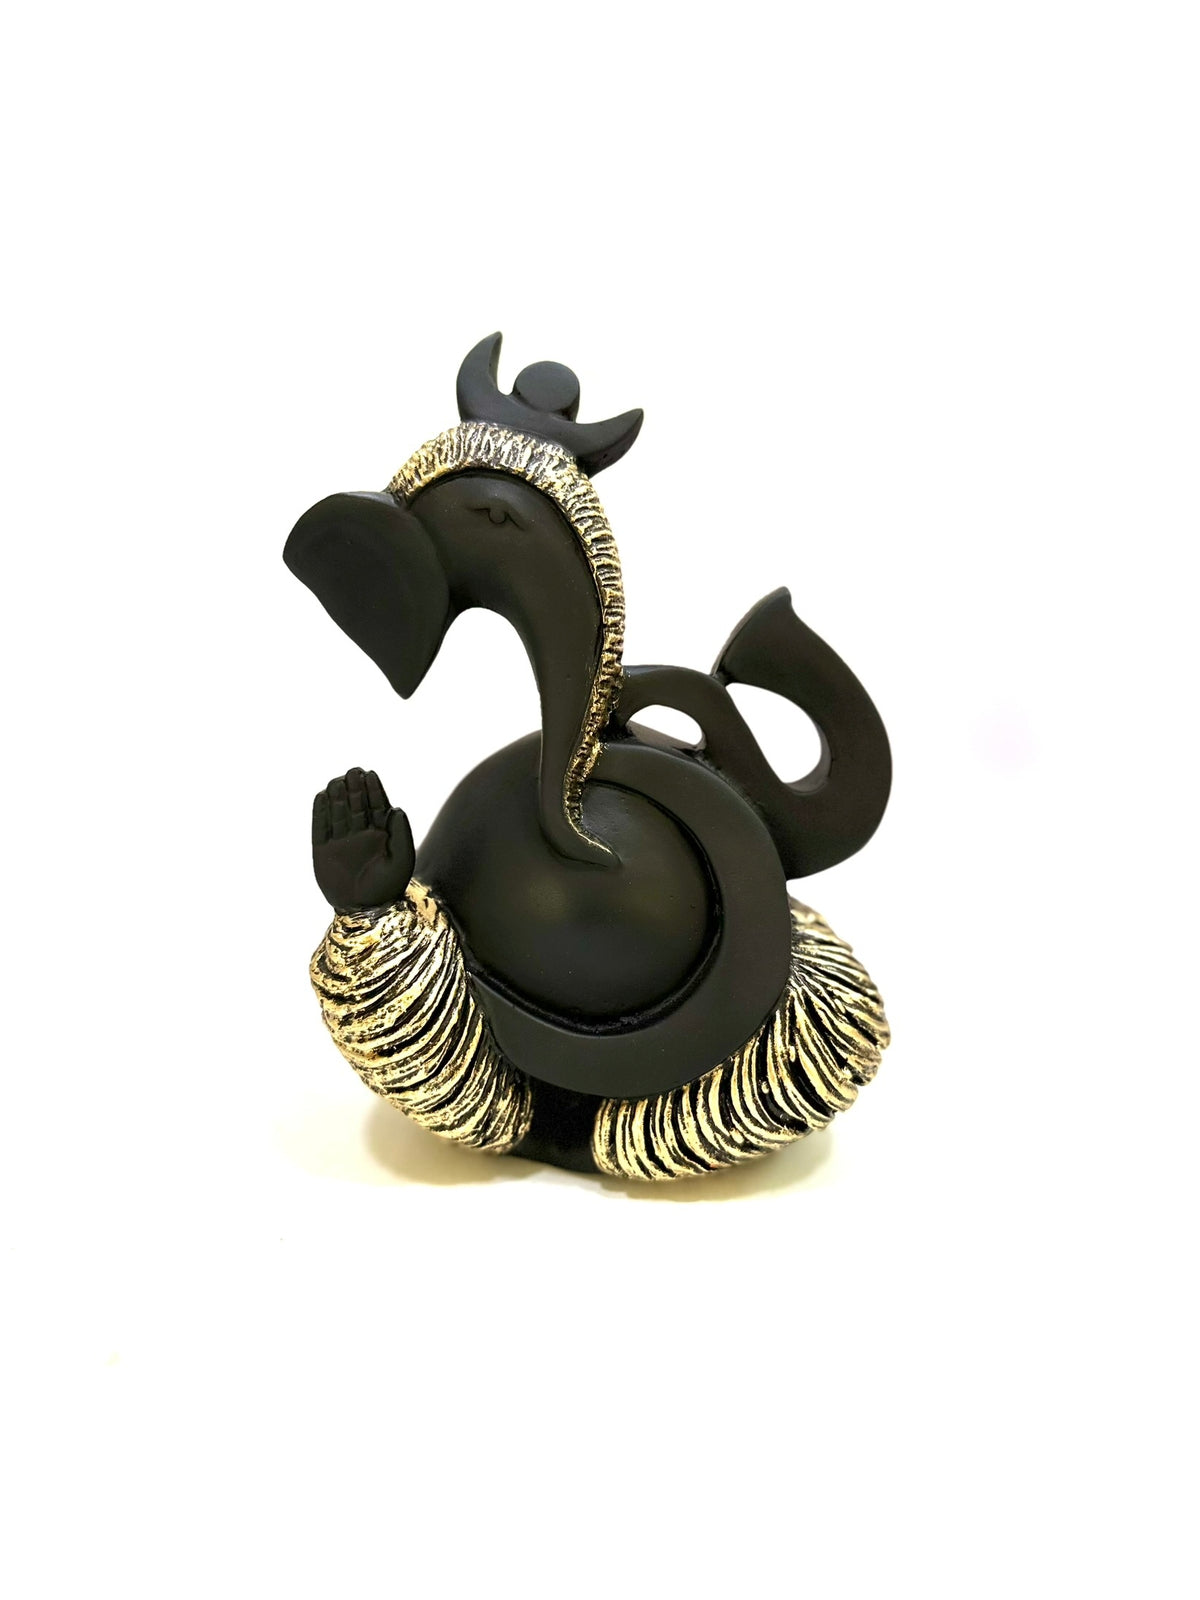 Lord Ganesha In New Elegant Style Resin Collectible Exclusive Shape By Tamrapatra - Tamrapatra